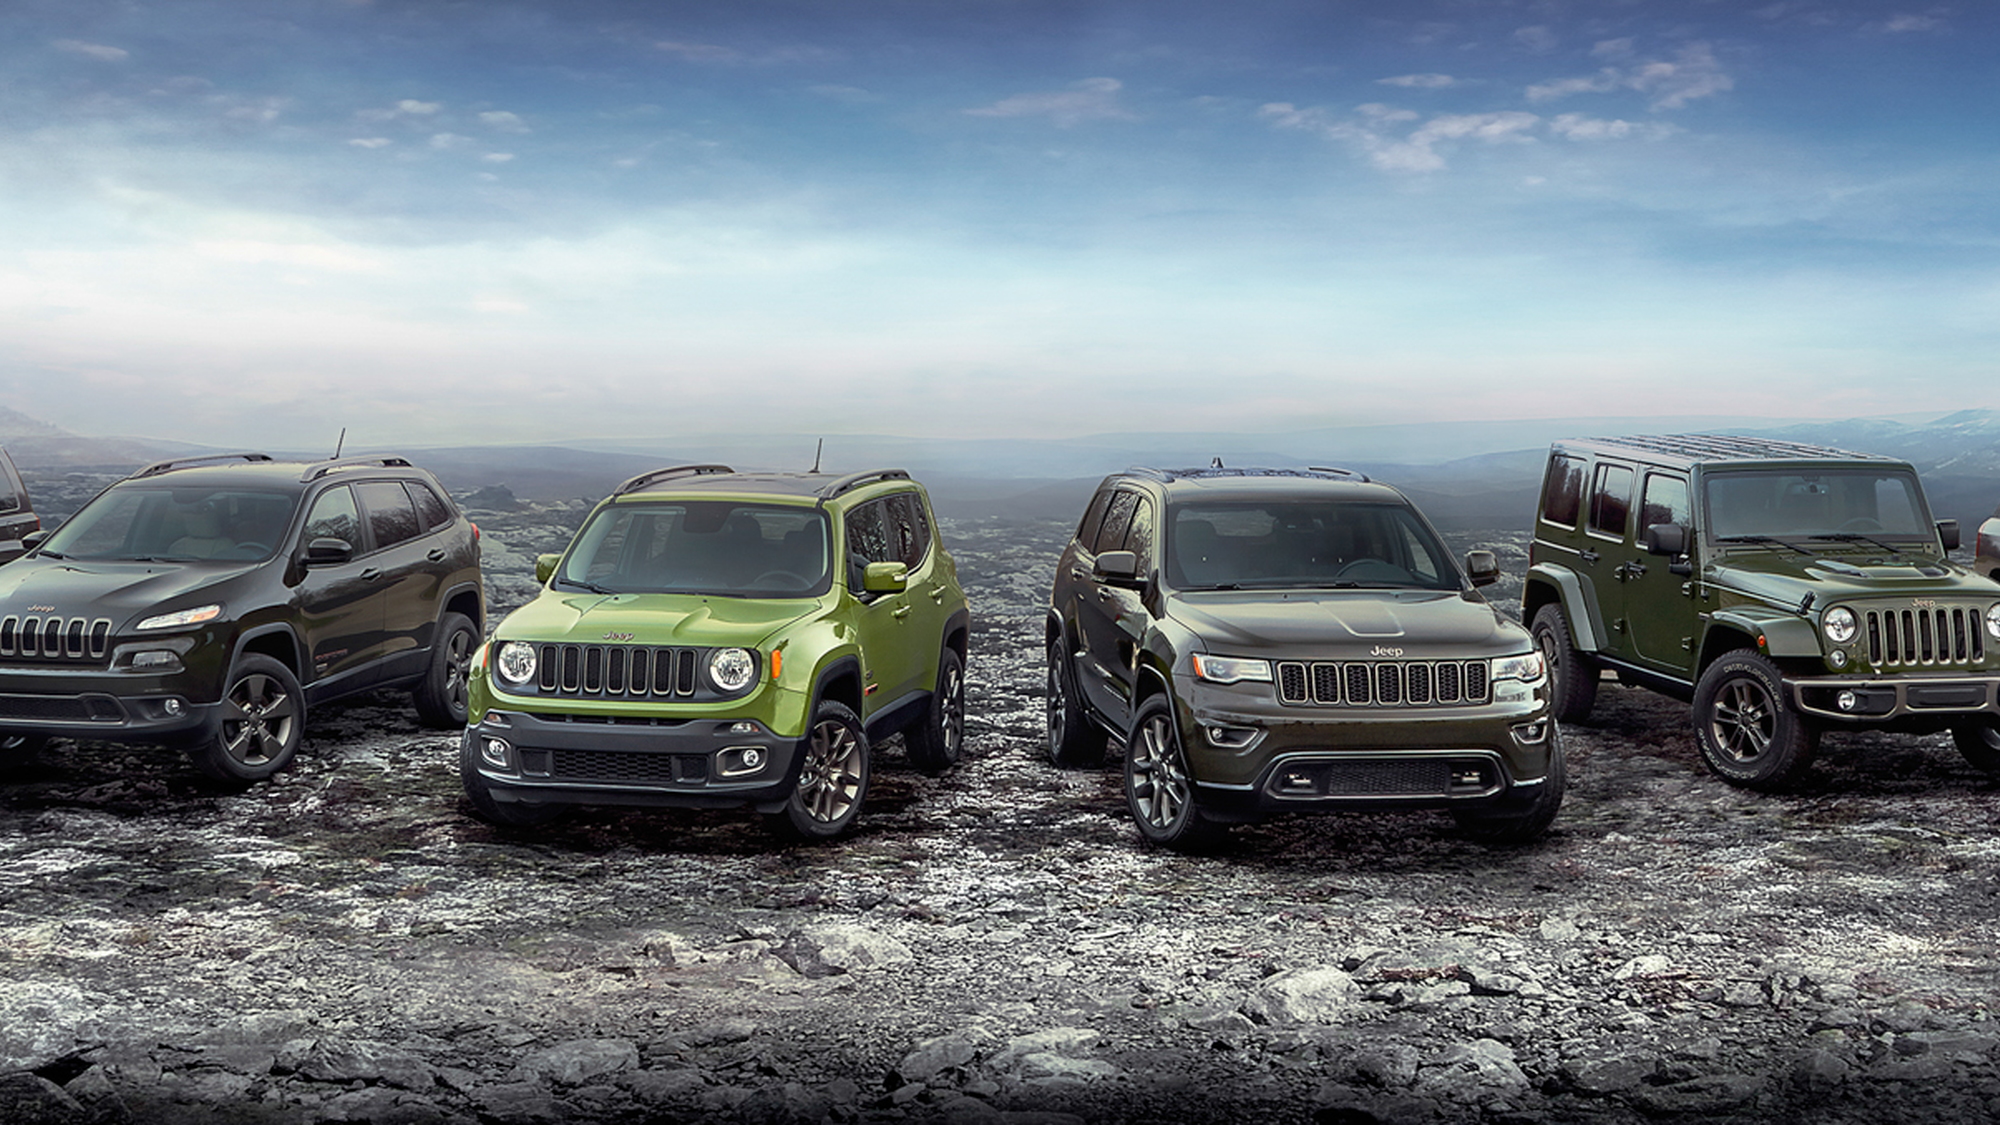 2016 Jeep 75th Anniversary edition complete model lineup